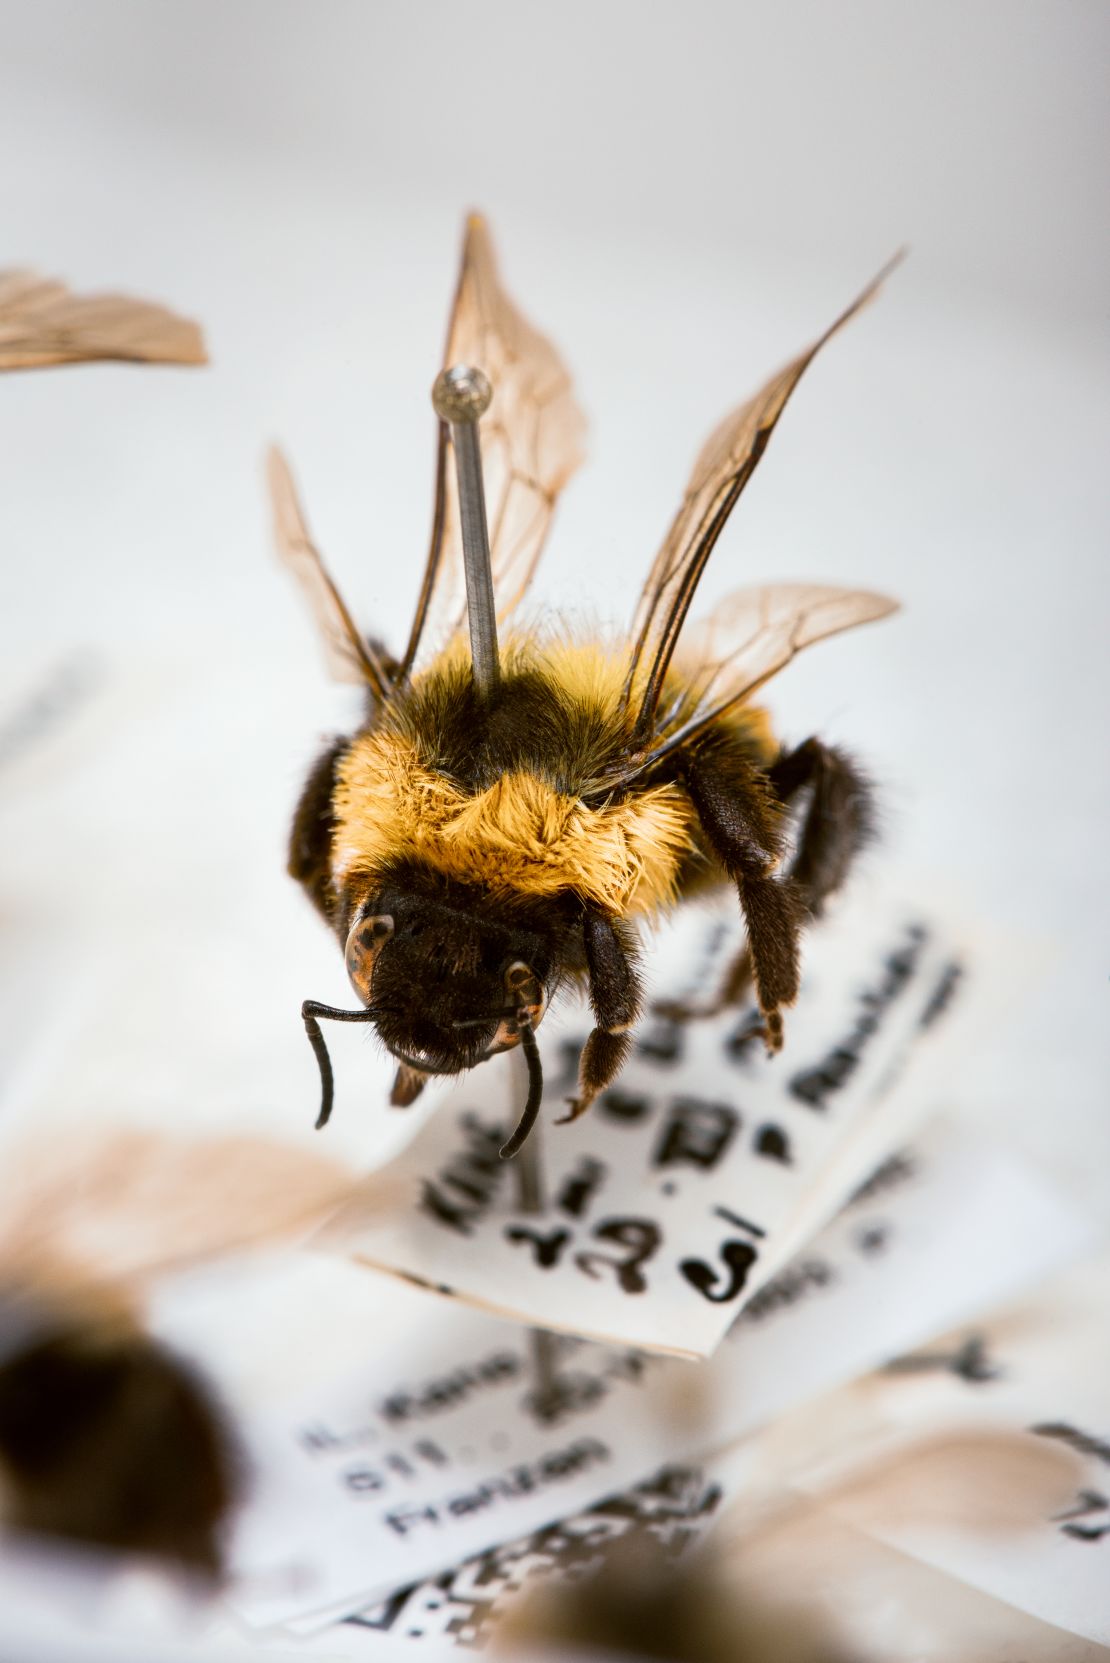 This specimen of the critically endangered rusty patched bumblebee is from the Field Museum's collection. 